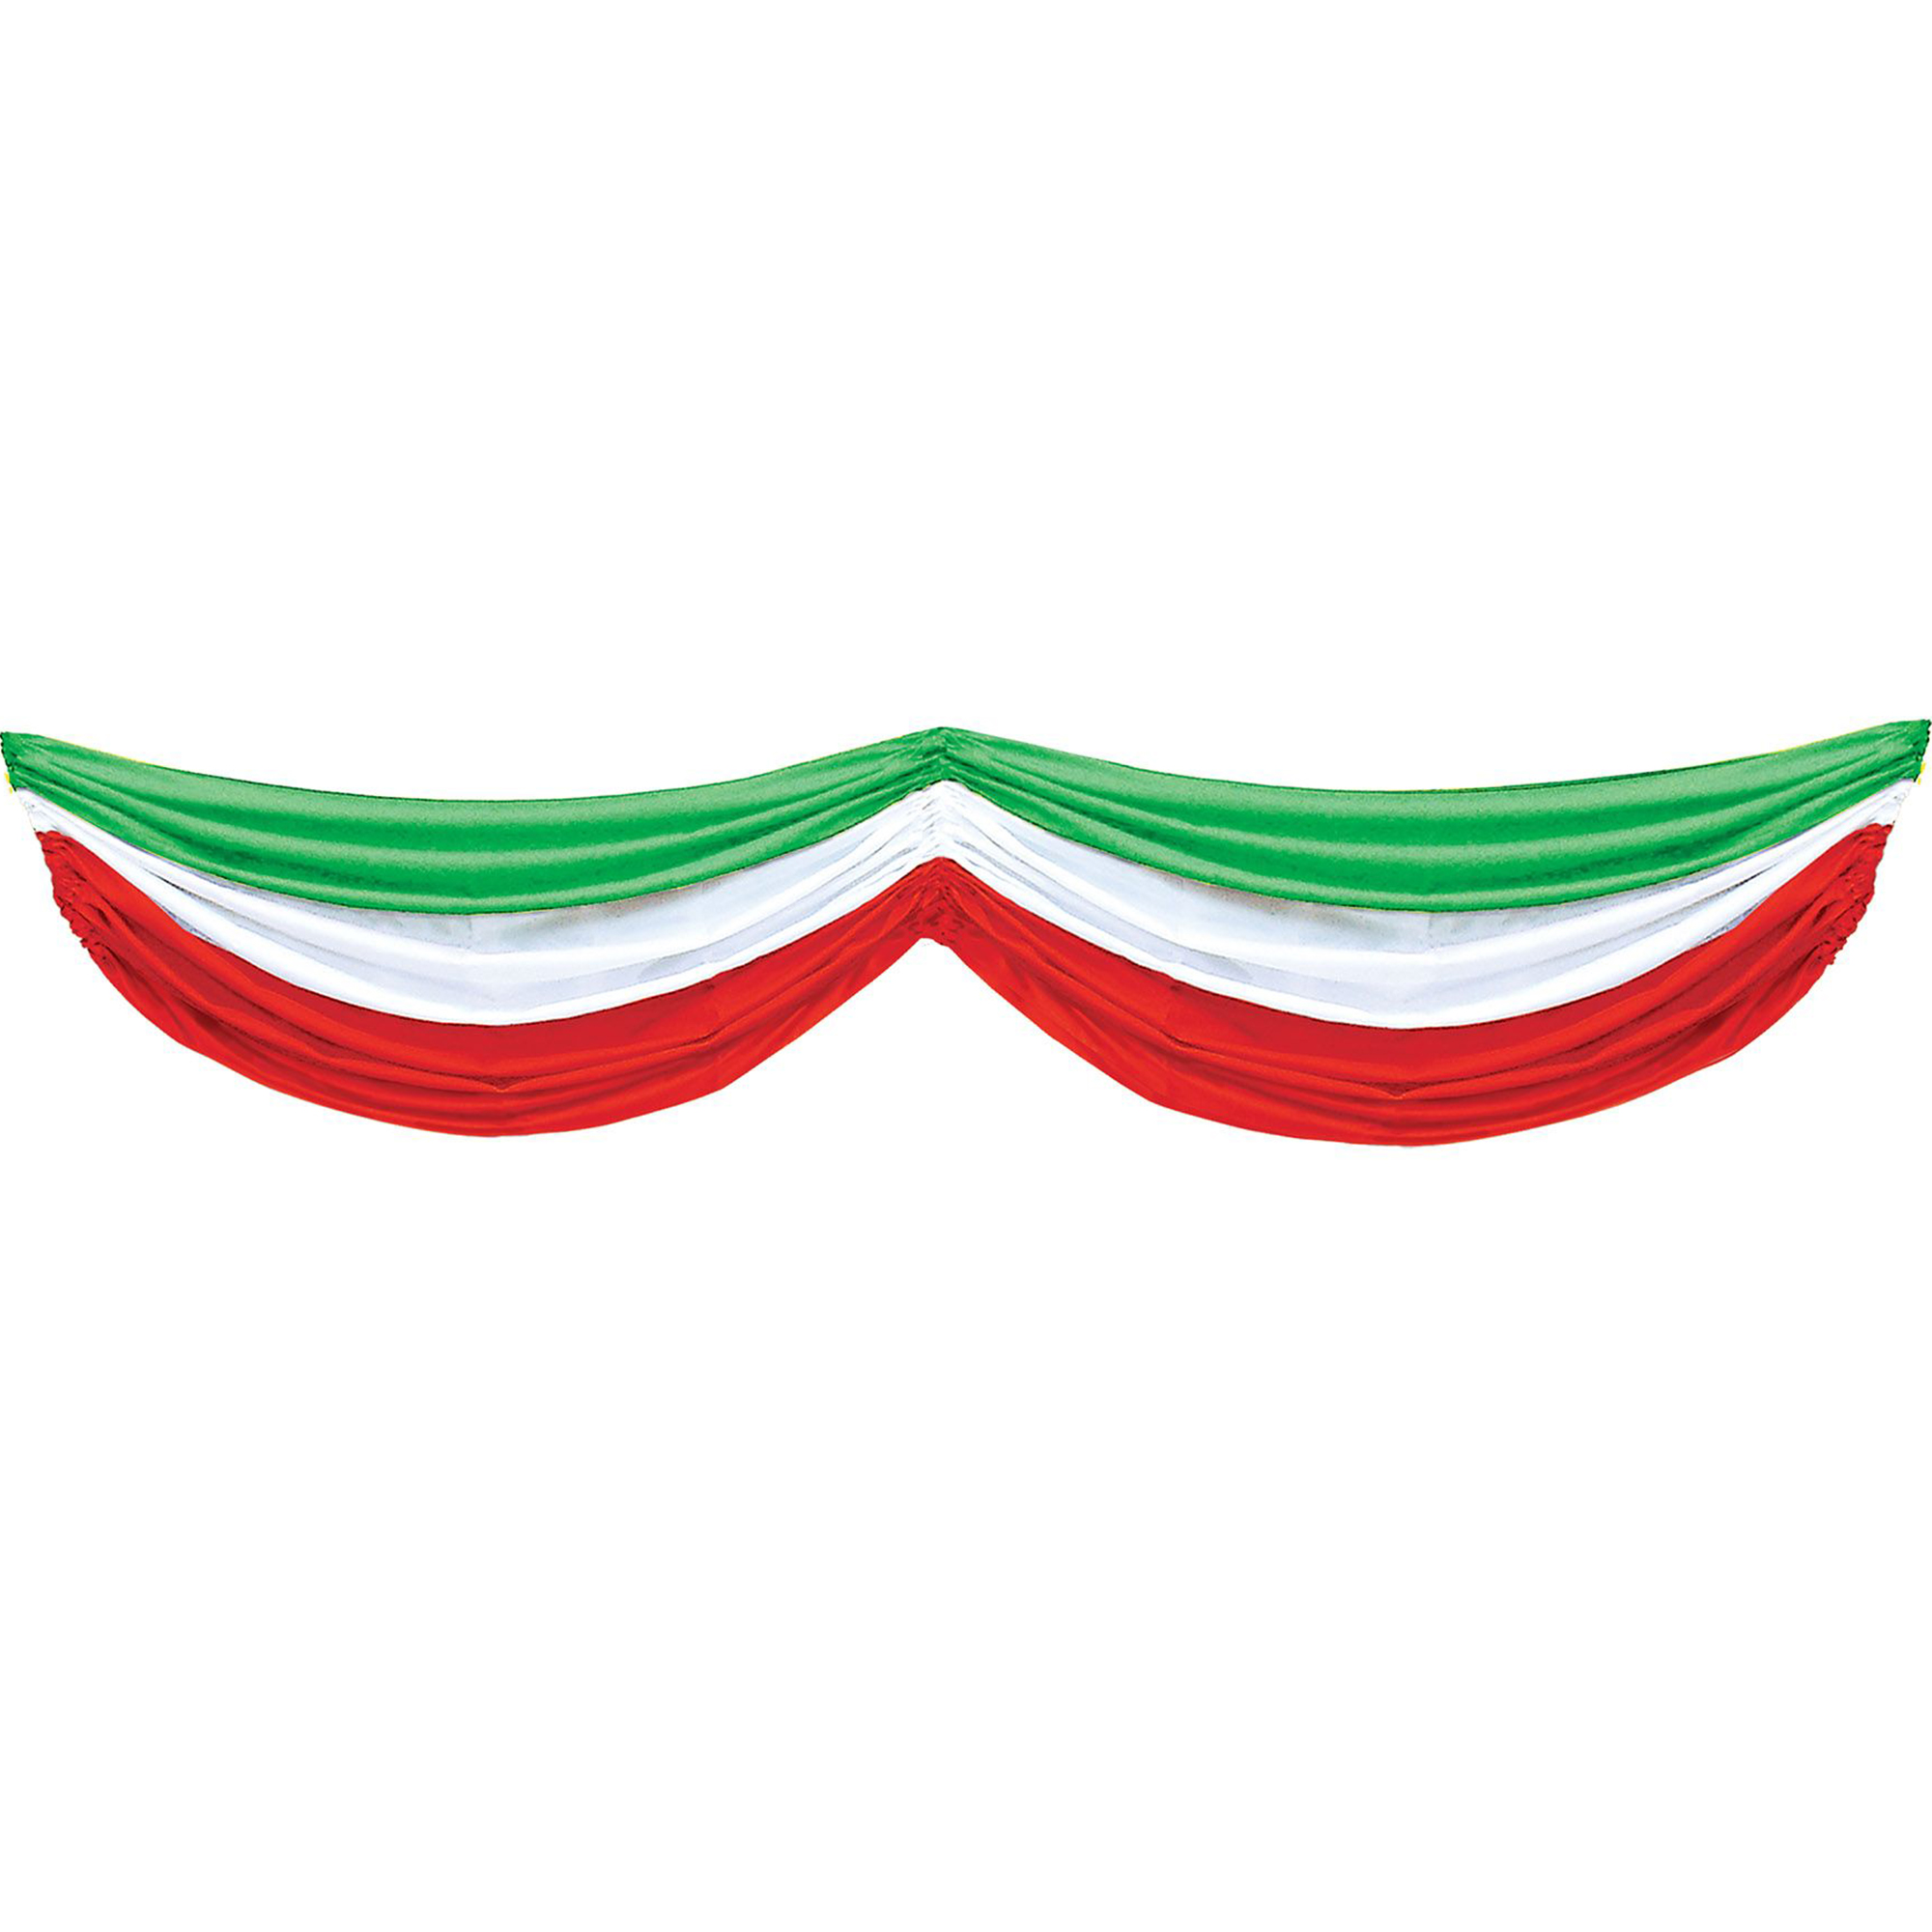 Red, White & Green Fabric Bunting Decoration by Windy City Novelties